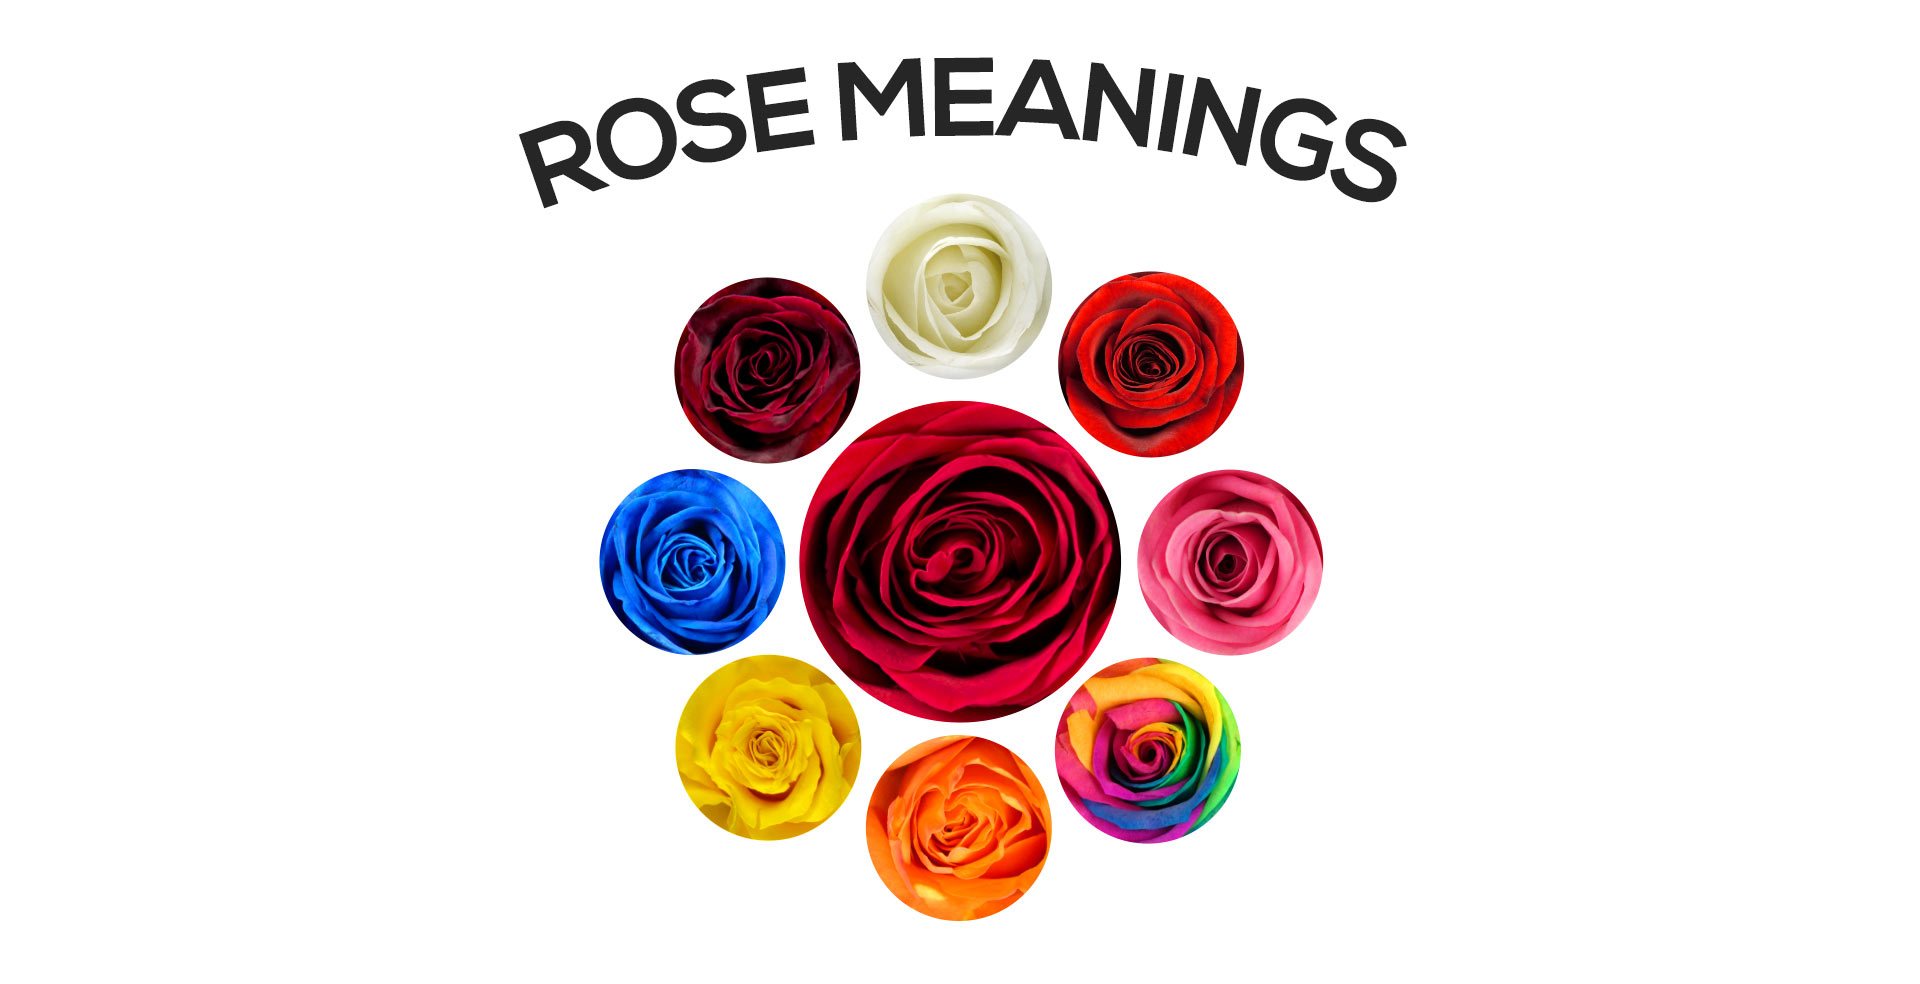 The meaning and symbolism behind different rose colours